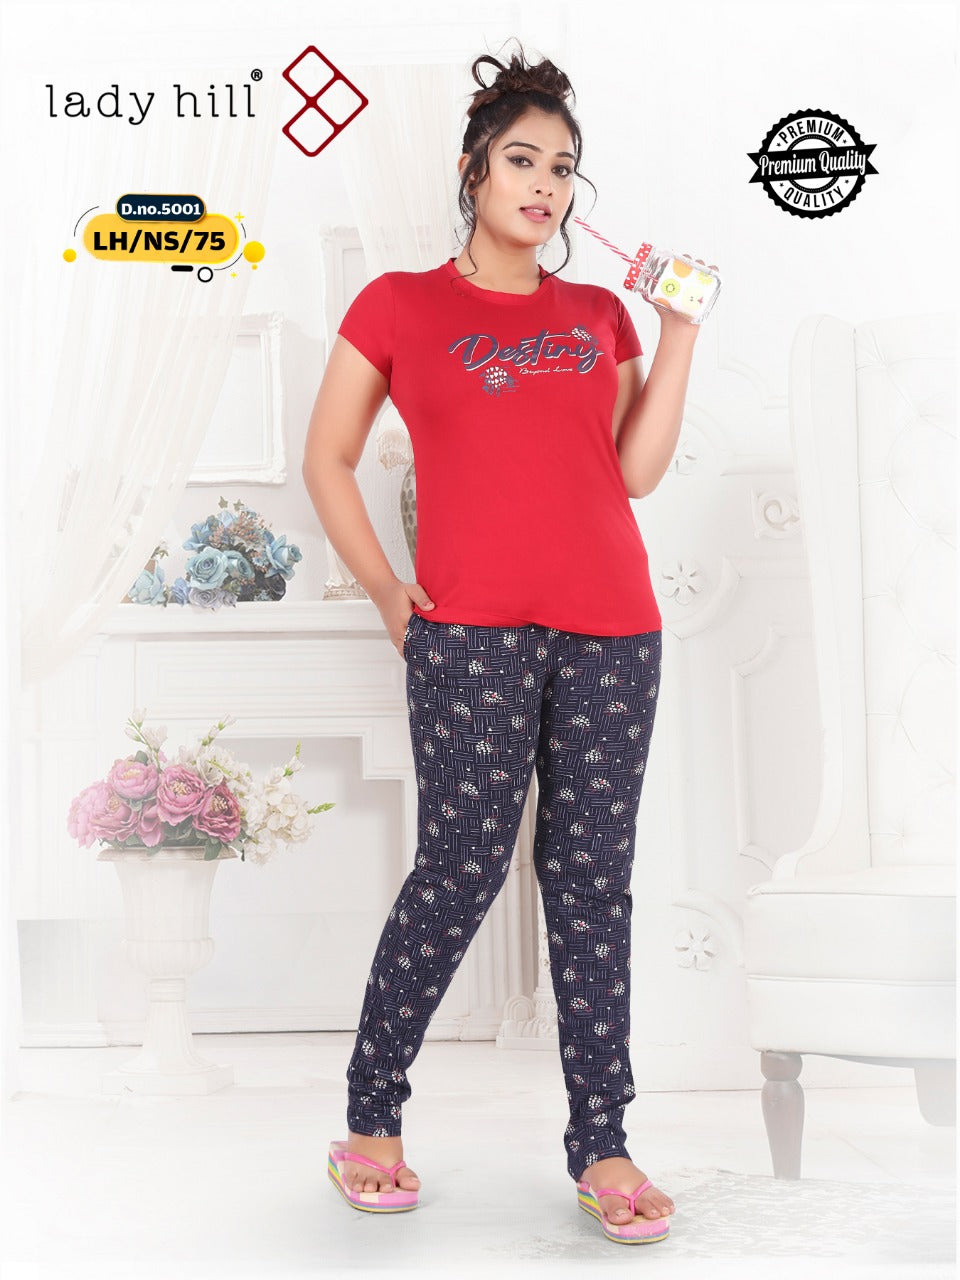 Ready At Store 5001-75 Lady Hill Hosiery Cotton Pyjama Night Suits